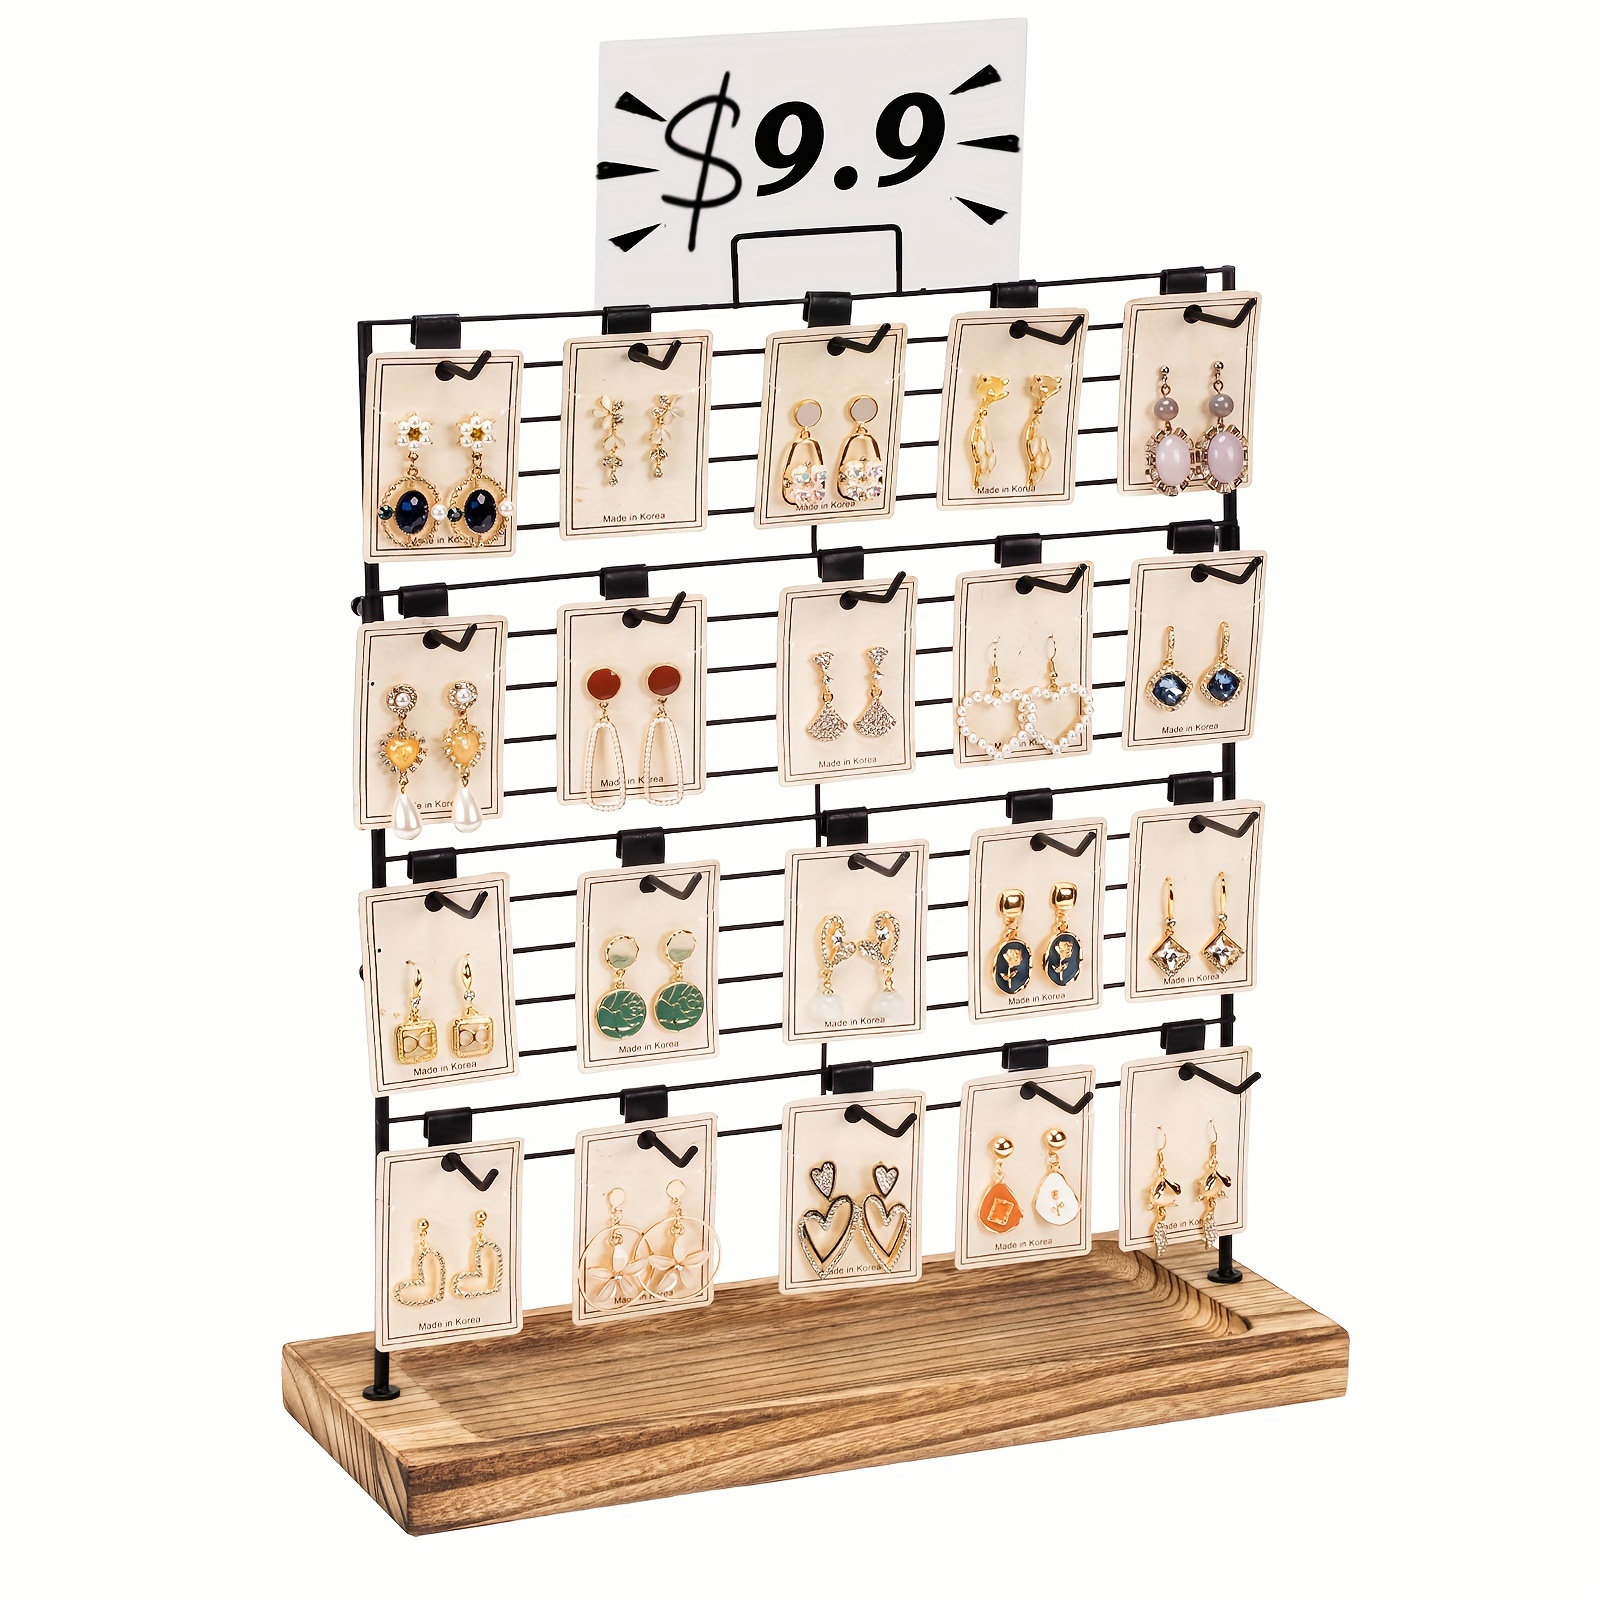 Earring display review for my vendor friends! #vendorboothdisplay #ama